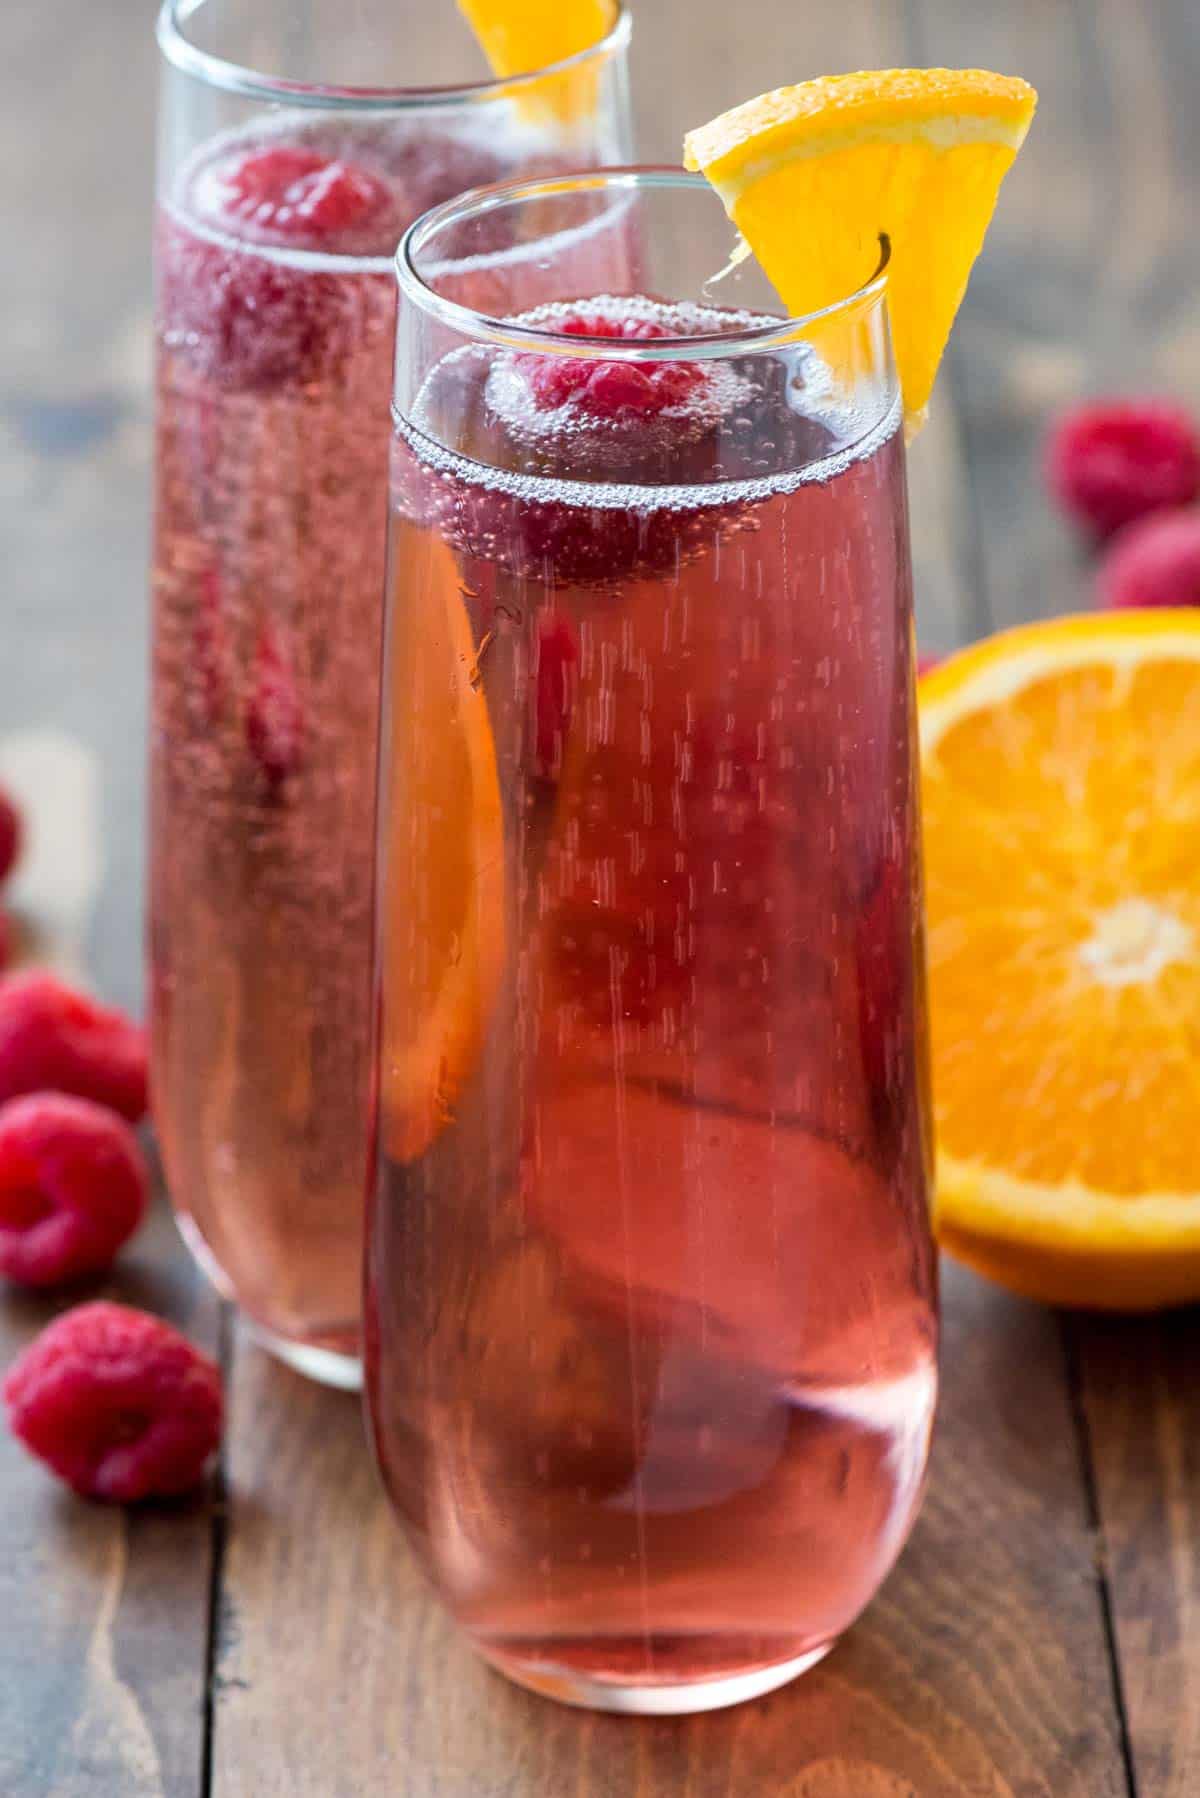 https://www.crazyforcrust.com/wp-content/uploads/2017/11/Pink-Champagne-Cocktail-Punch-2-of-5.jpg